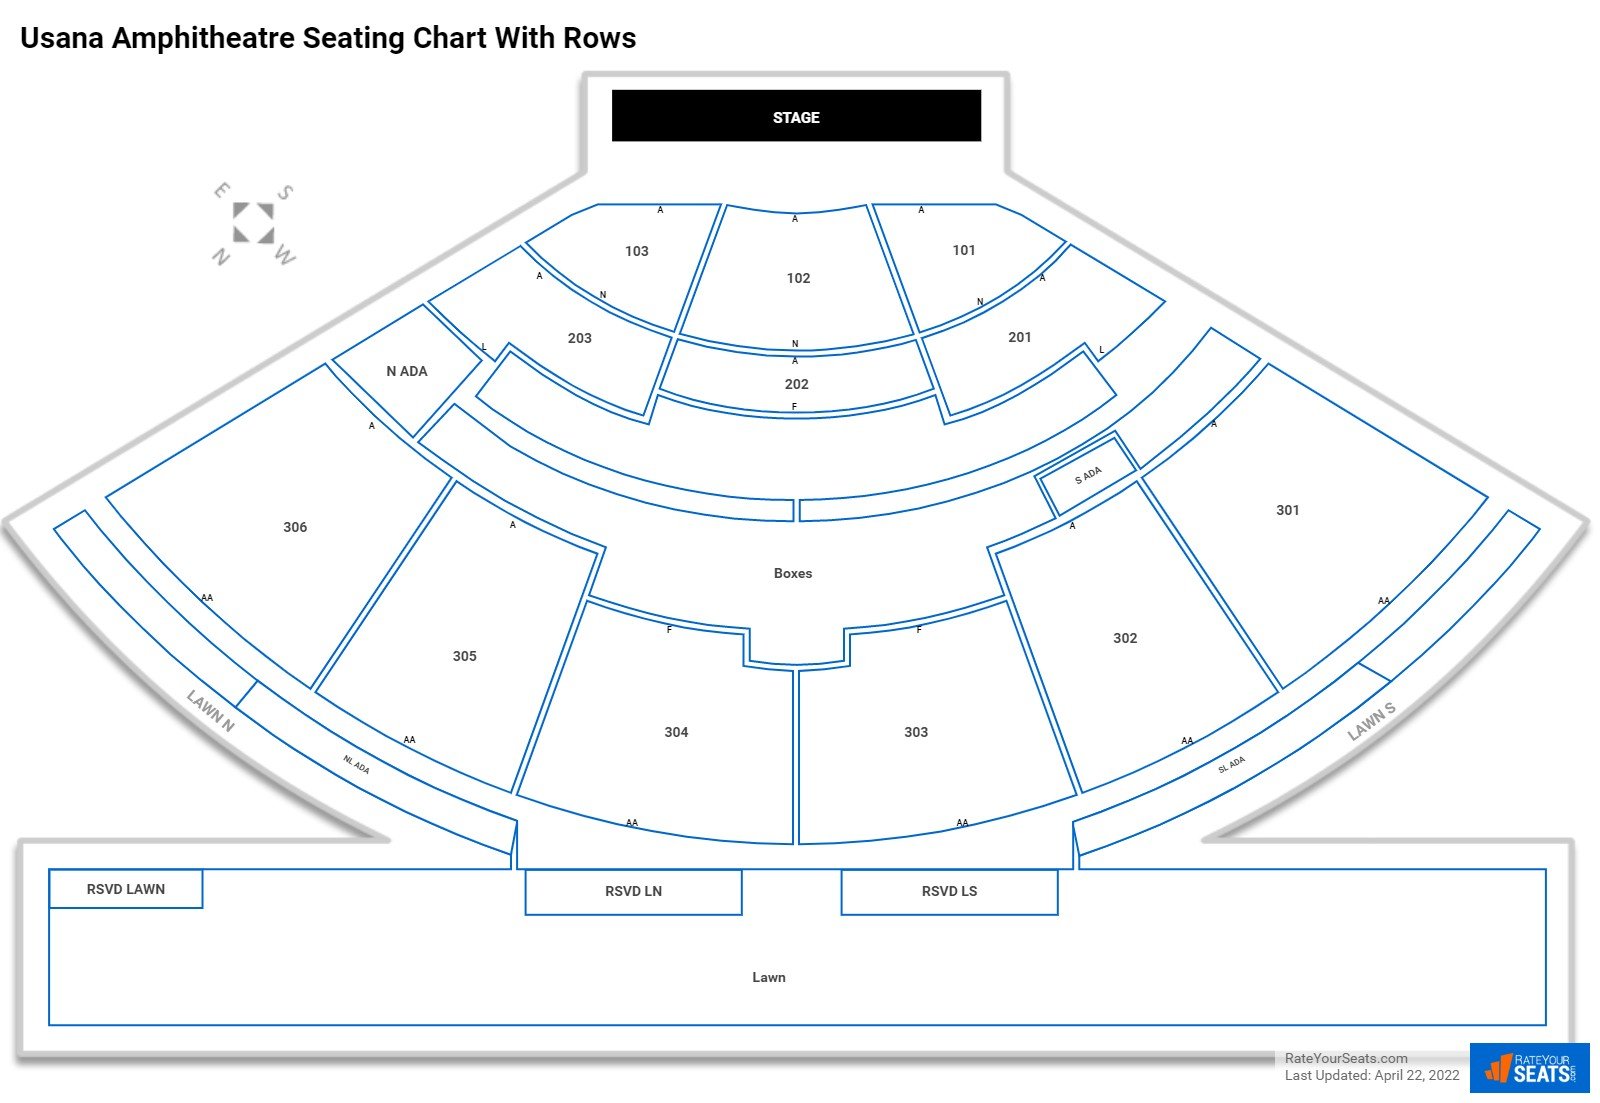 Usana Amphitheatre seating chart with row numbers